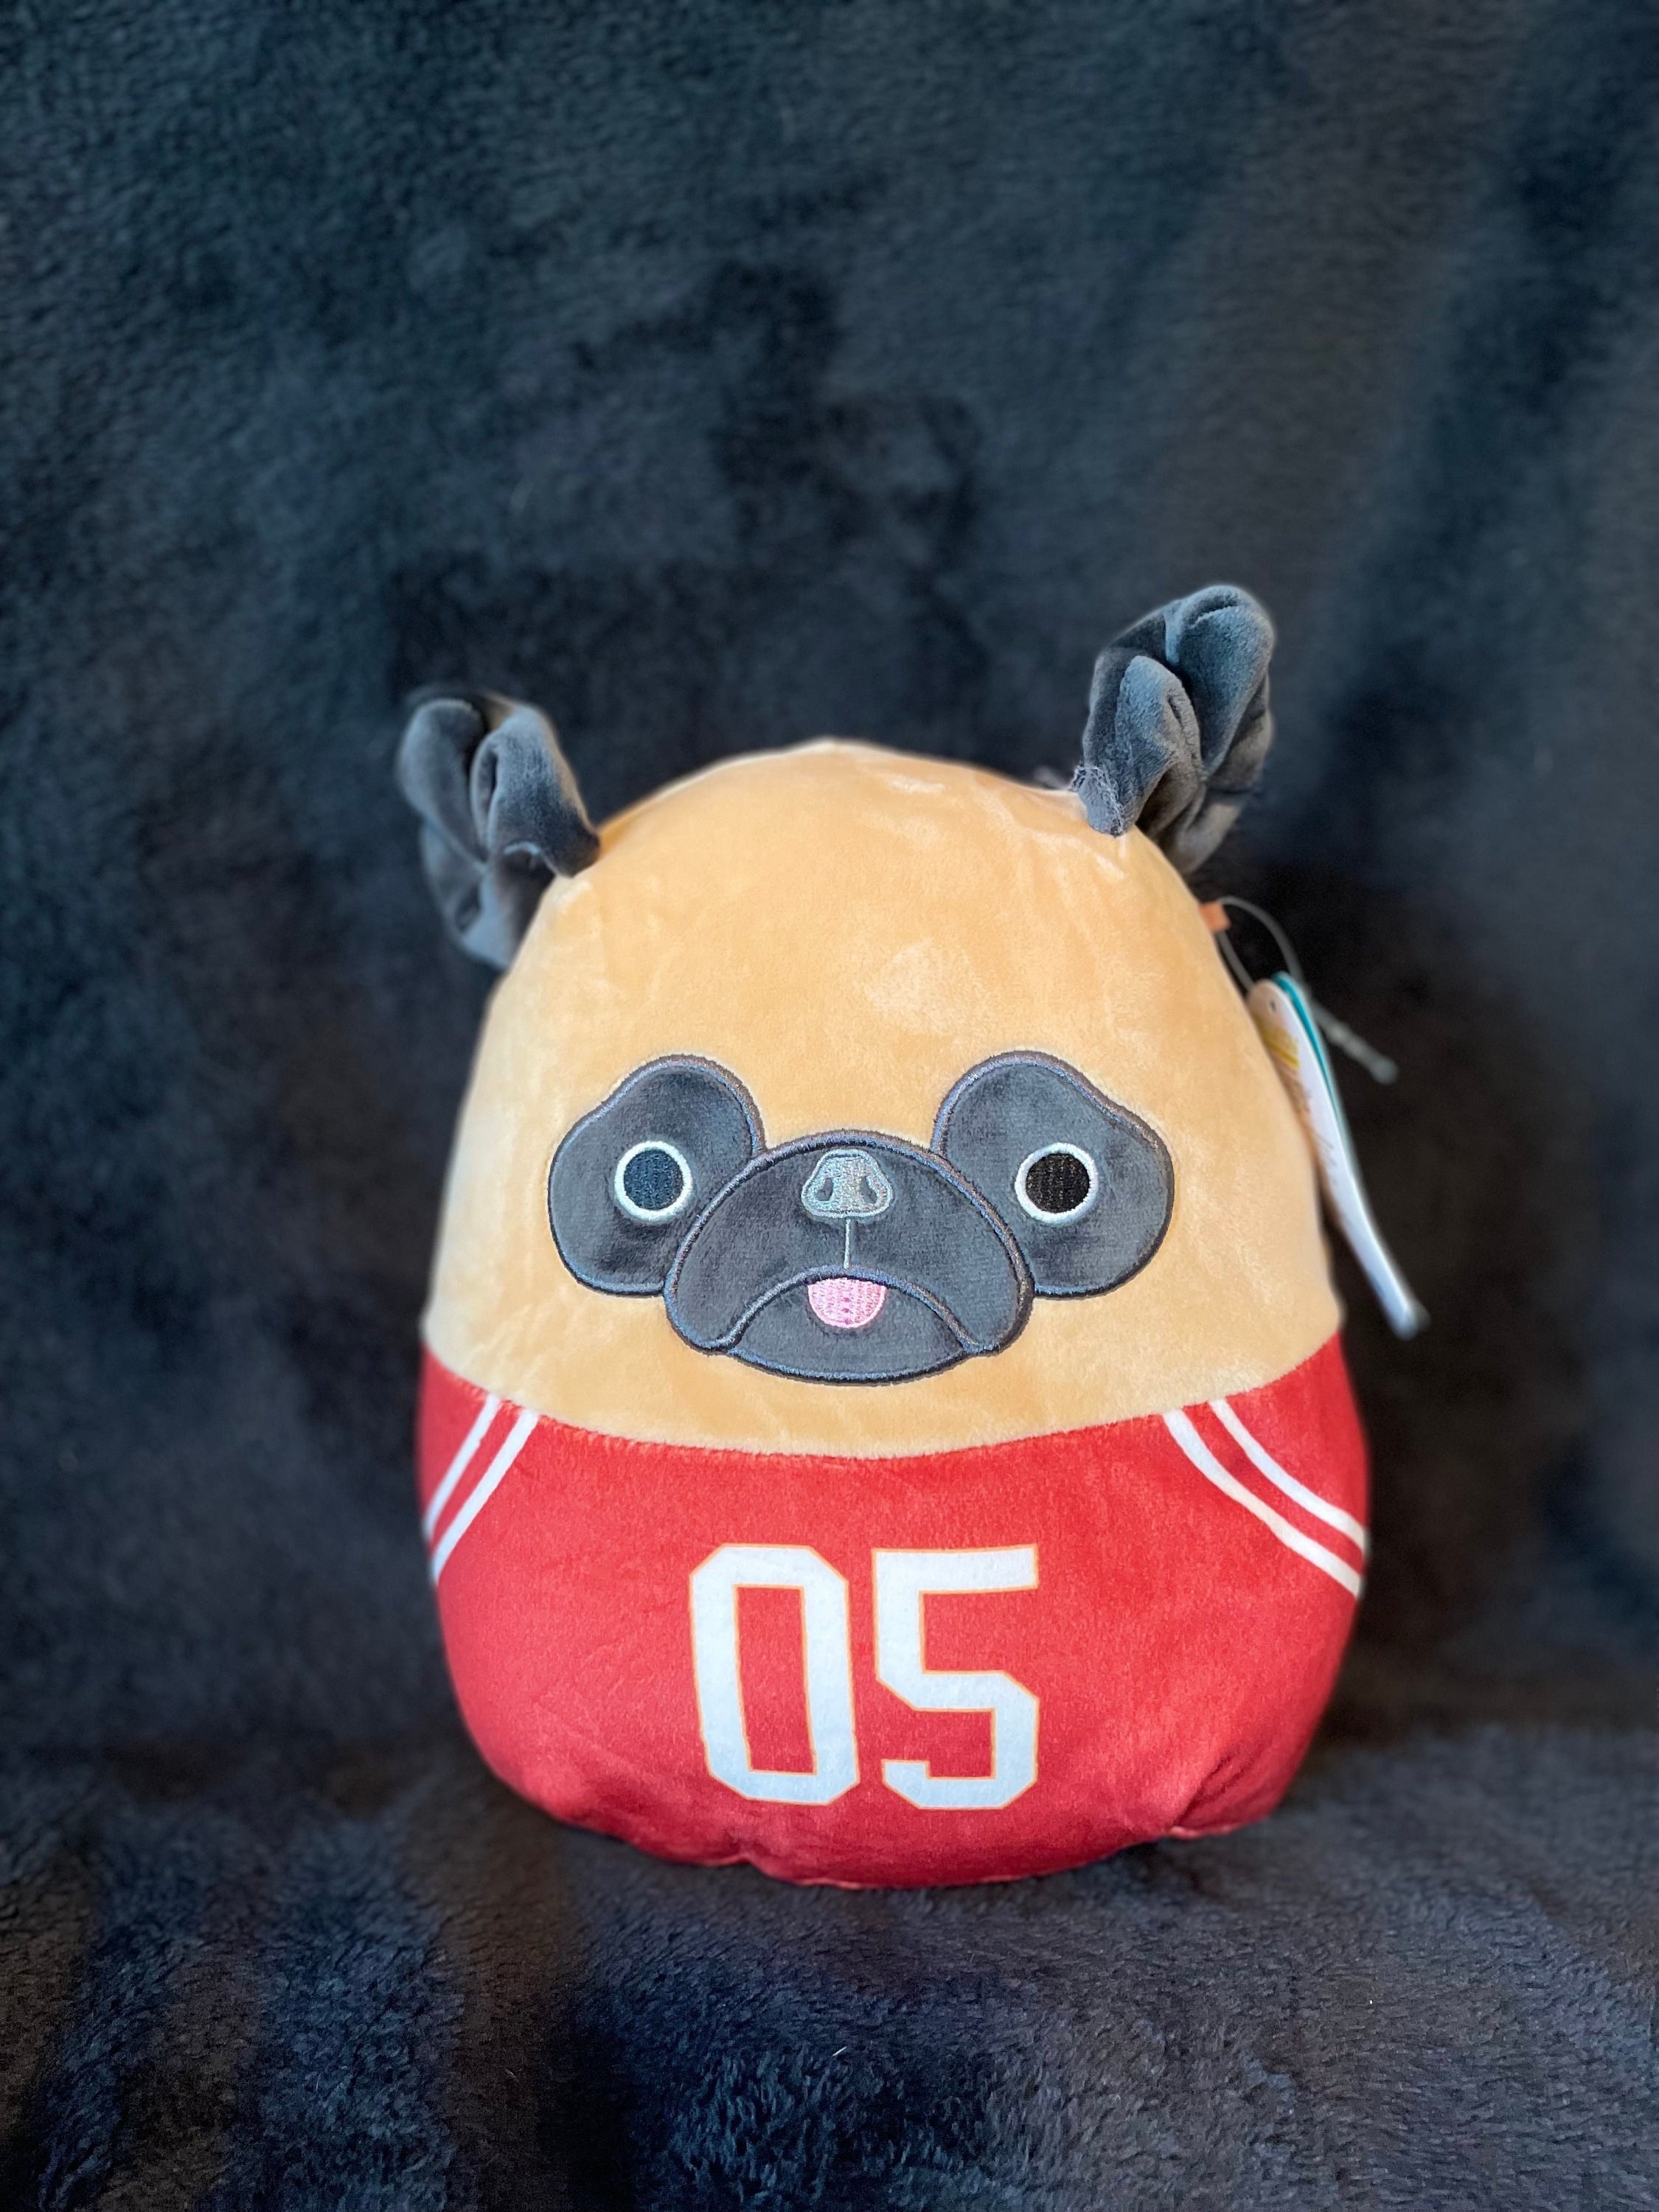 Personalized Squishmallow Prince Pug Football Jersey 9, Sport Dog